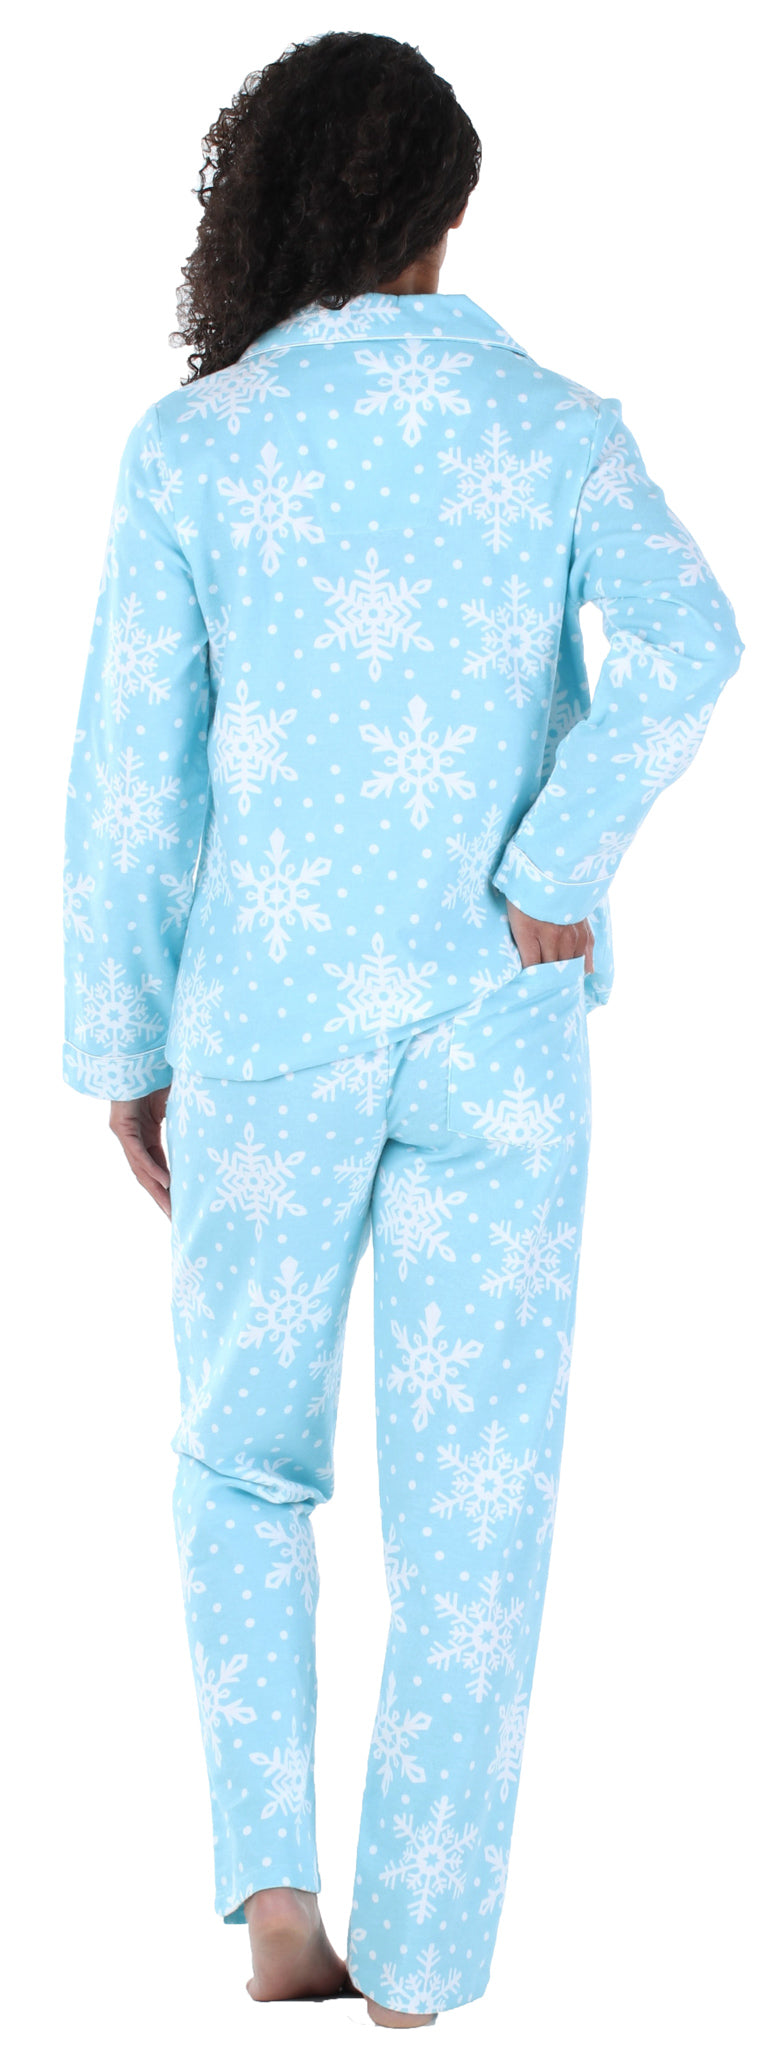 The rear view of a woman wearing pajamas. Fabric is Flannel and the print is Icy Snowflakes